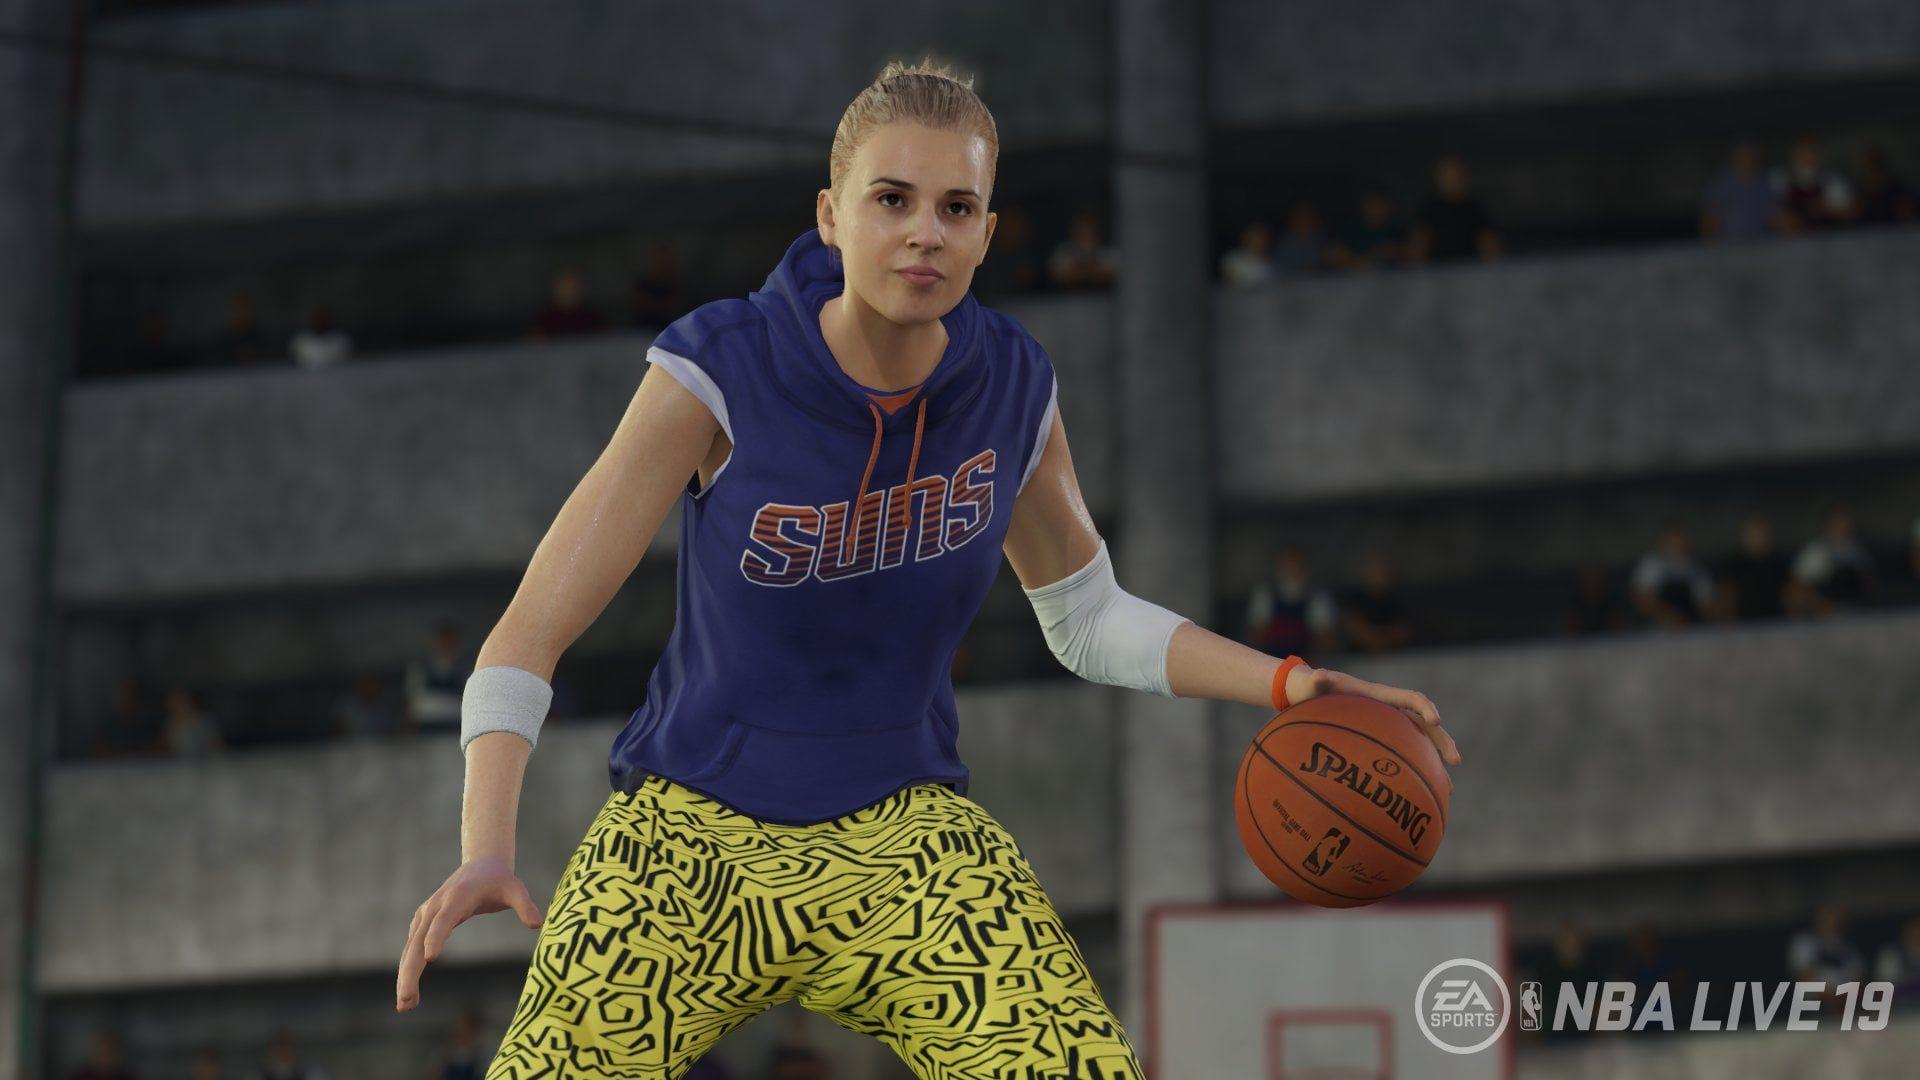 NBA LIVE 19 Introduces Female Create A Player